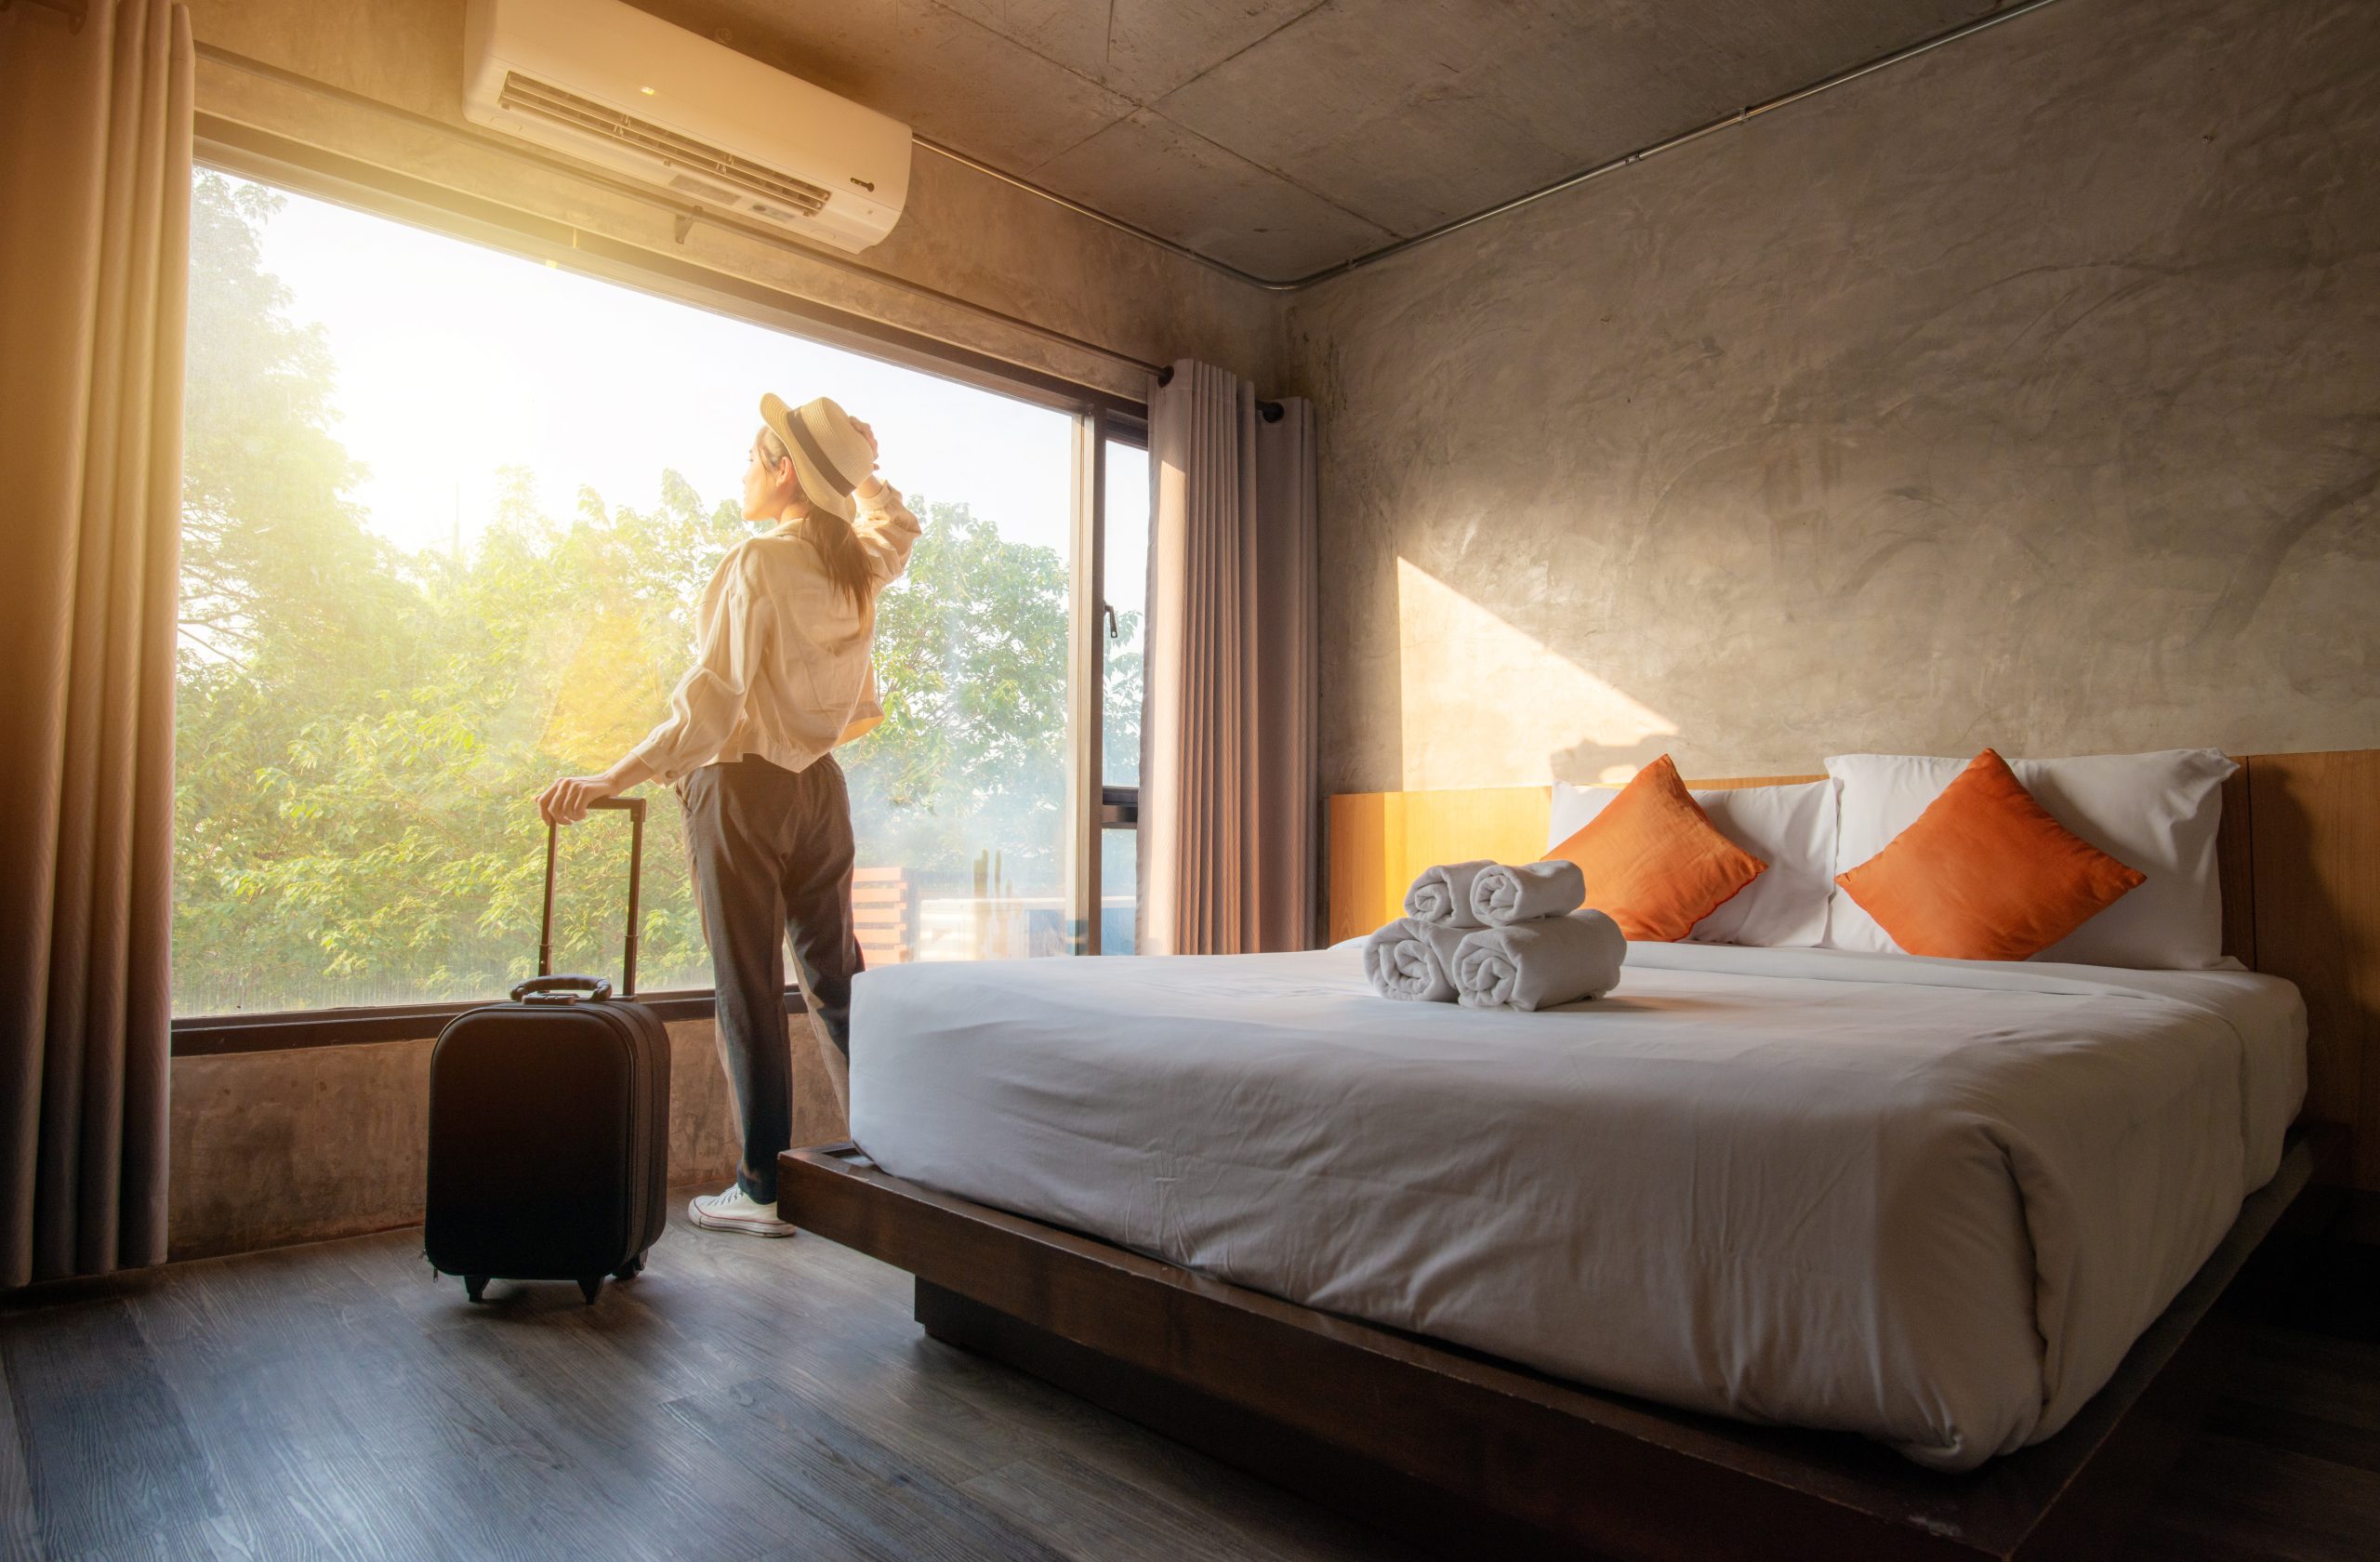 5 Hotels That Are Embracing Sustainable Practices